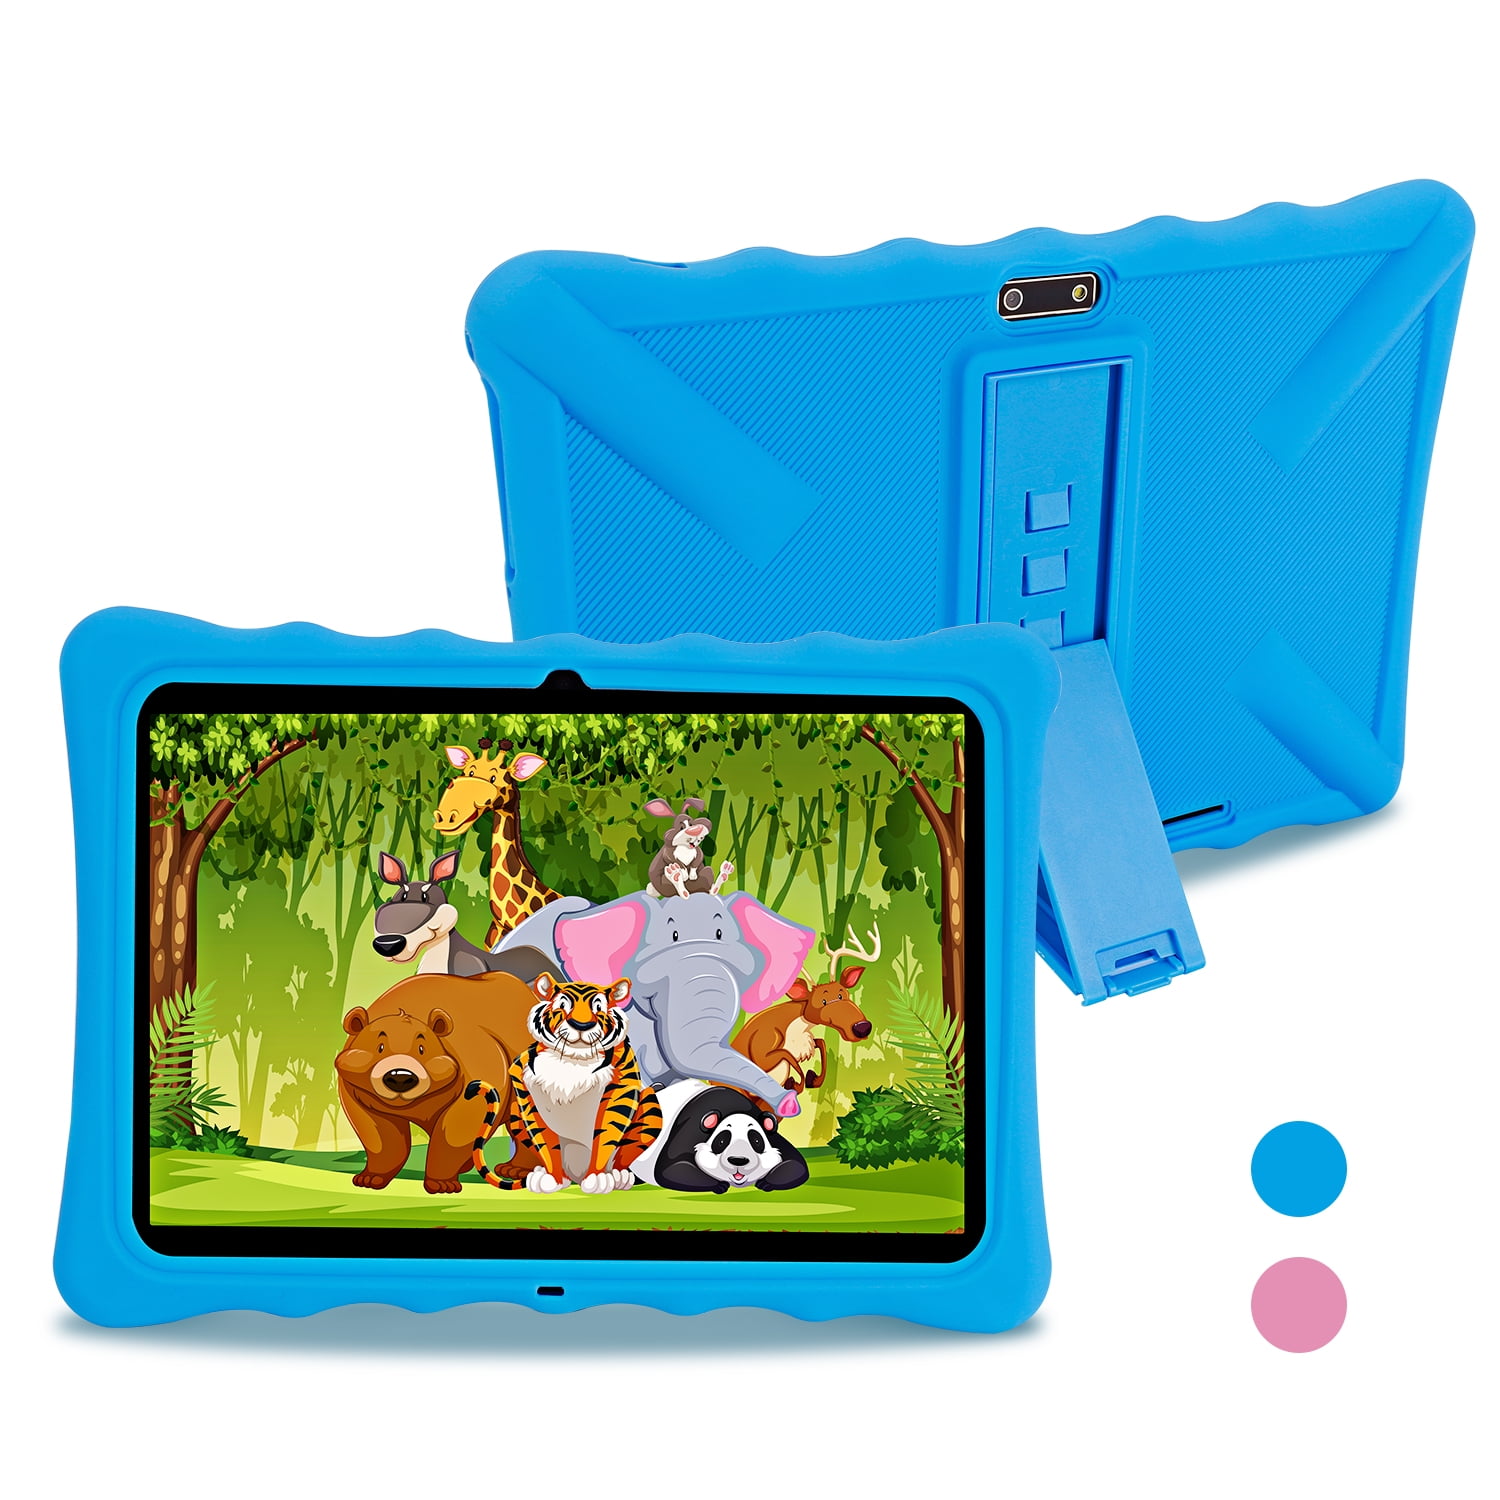 Veidoo Android 10 inch Kids Tablet, 32GB Storage, 3G WiFi Tablet for ...